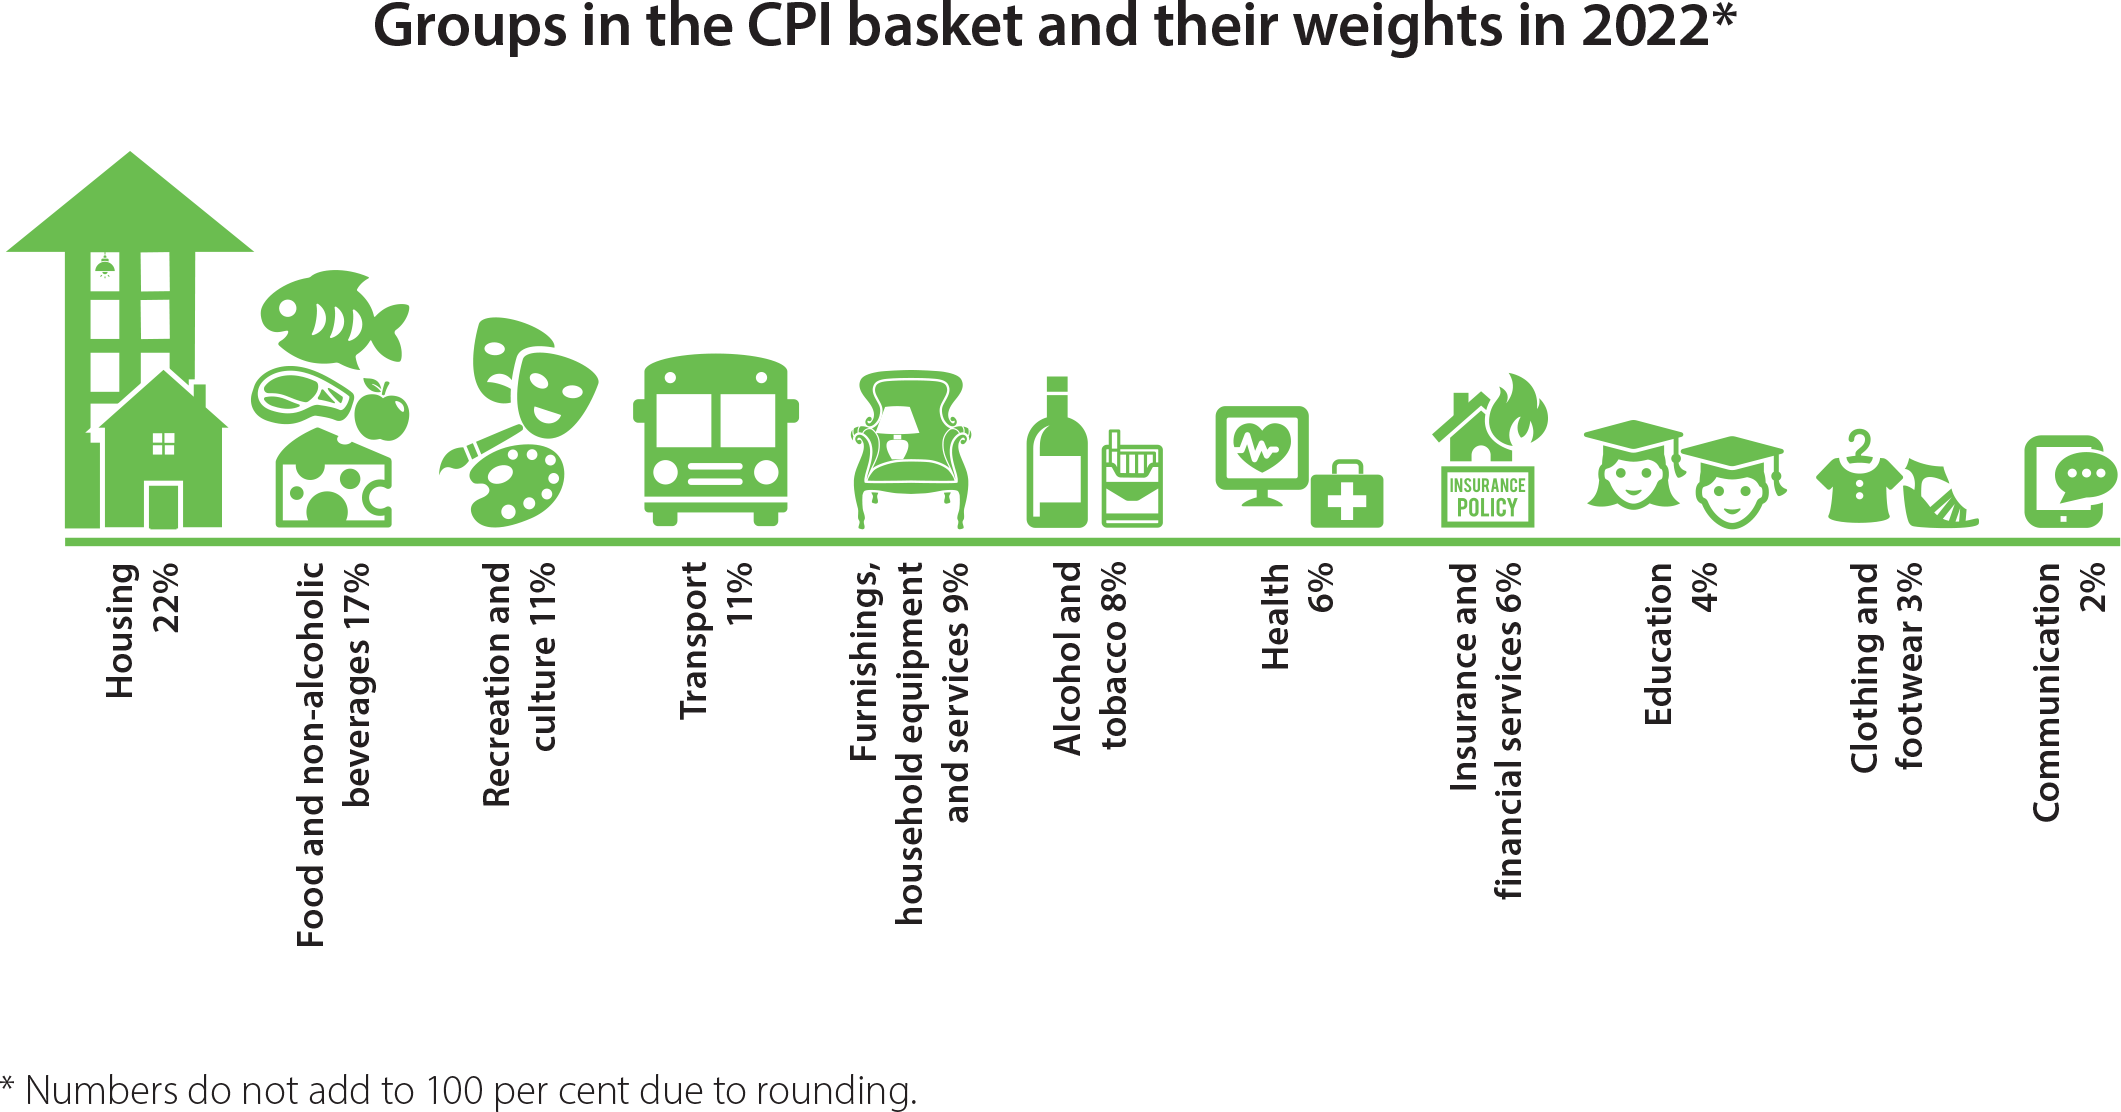 Groups in the CPI basket and their weights